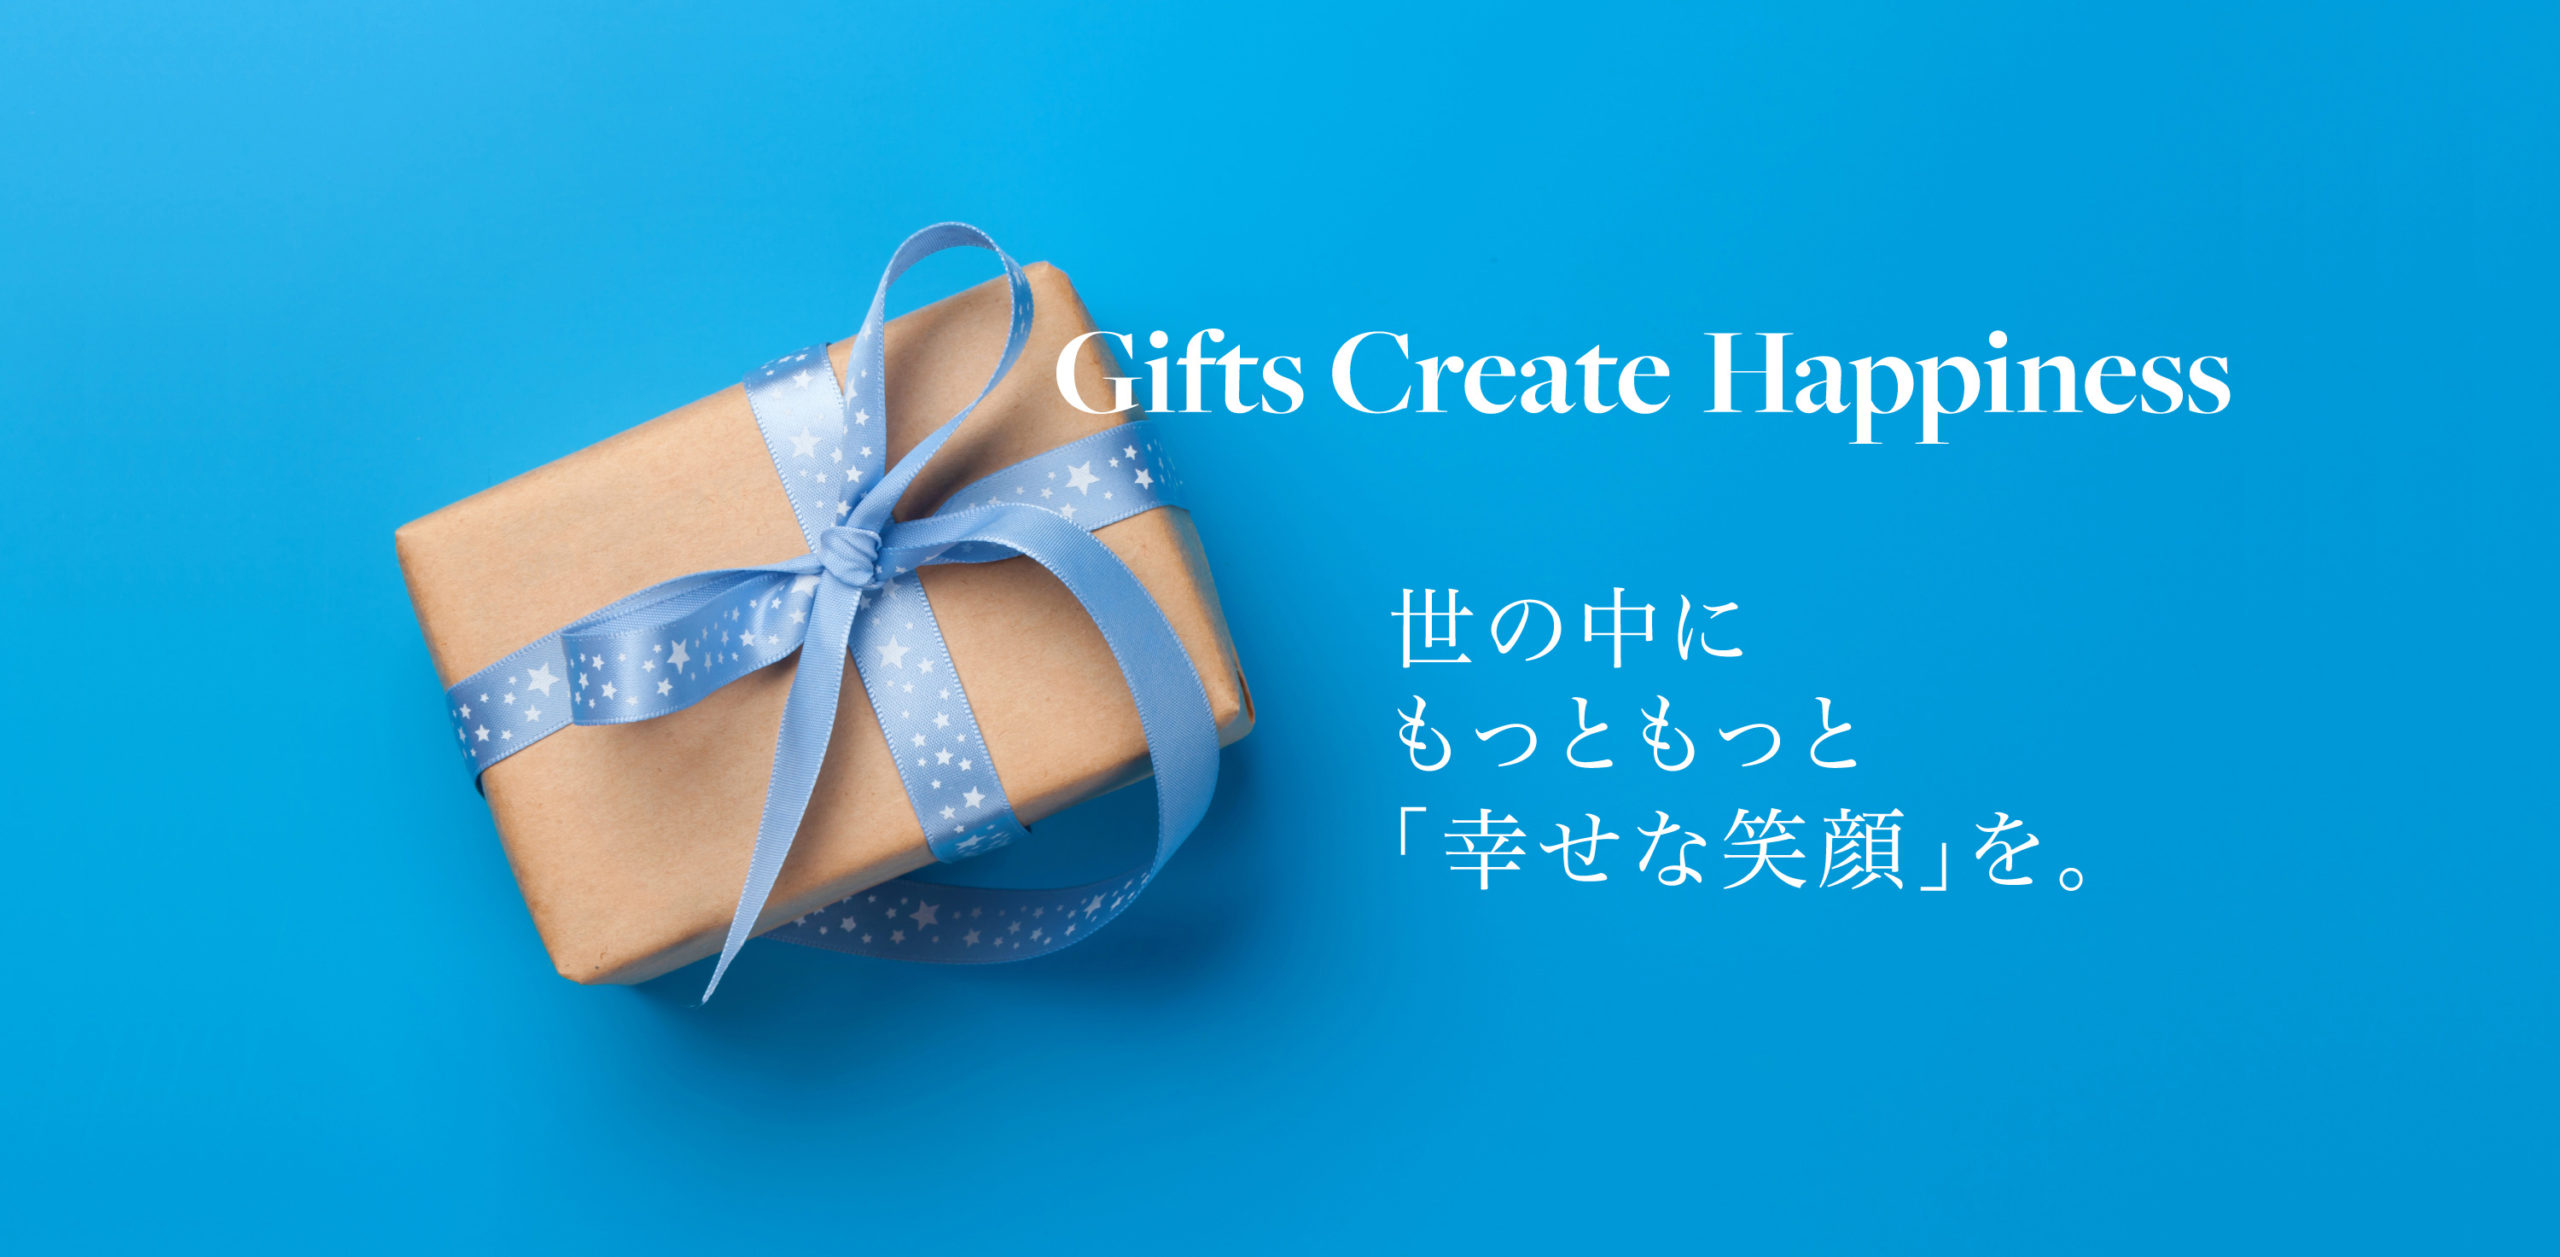 Christmas gift box on blue background. Top view with copy space